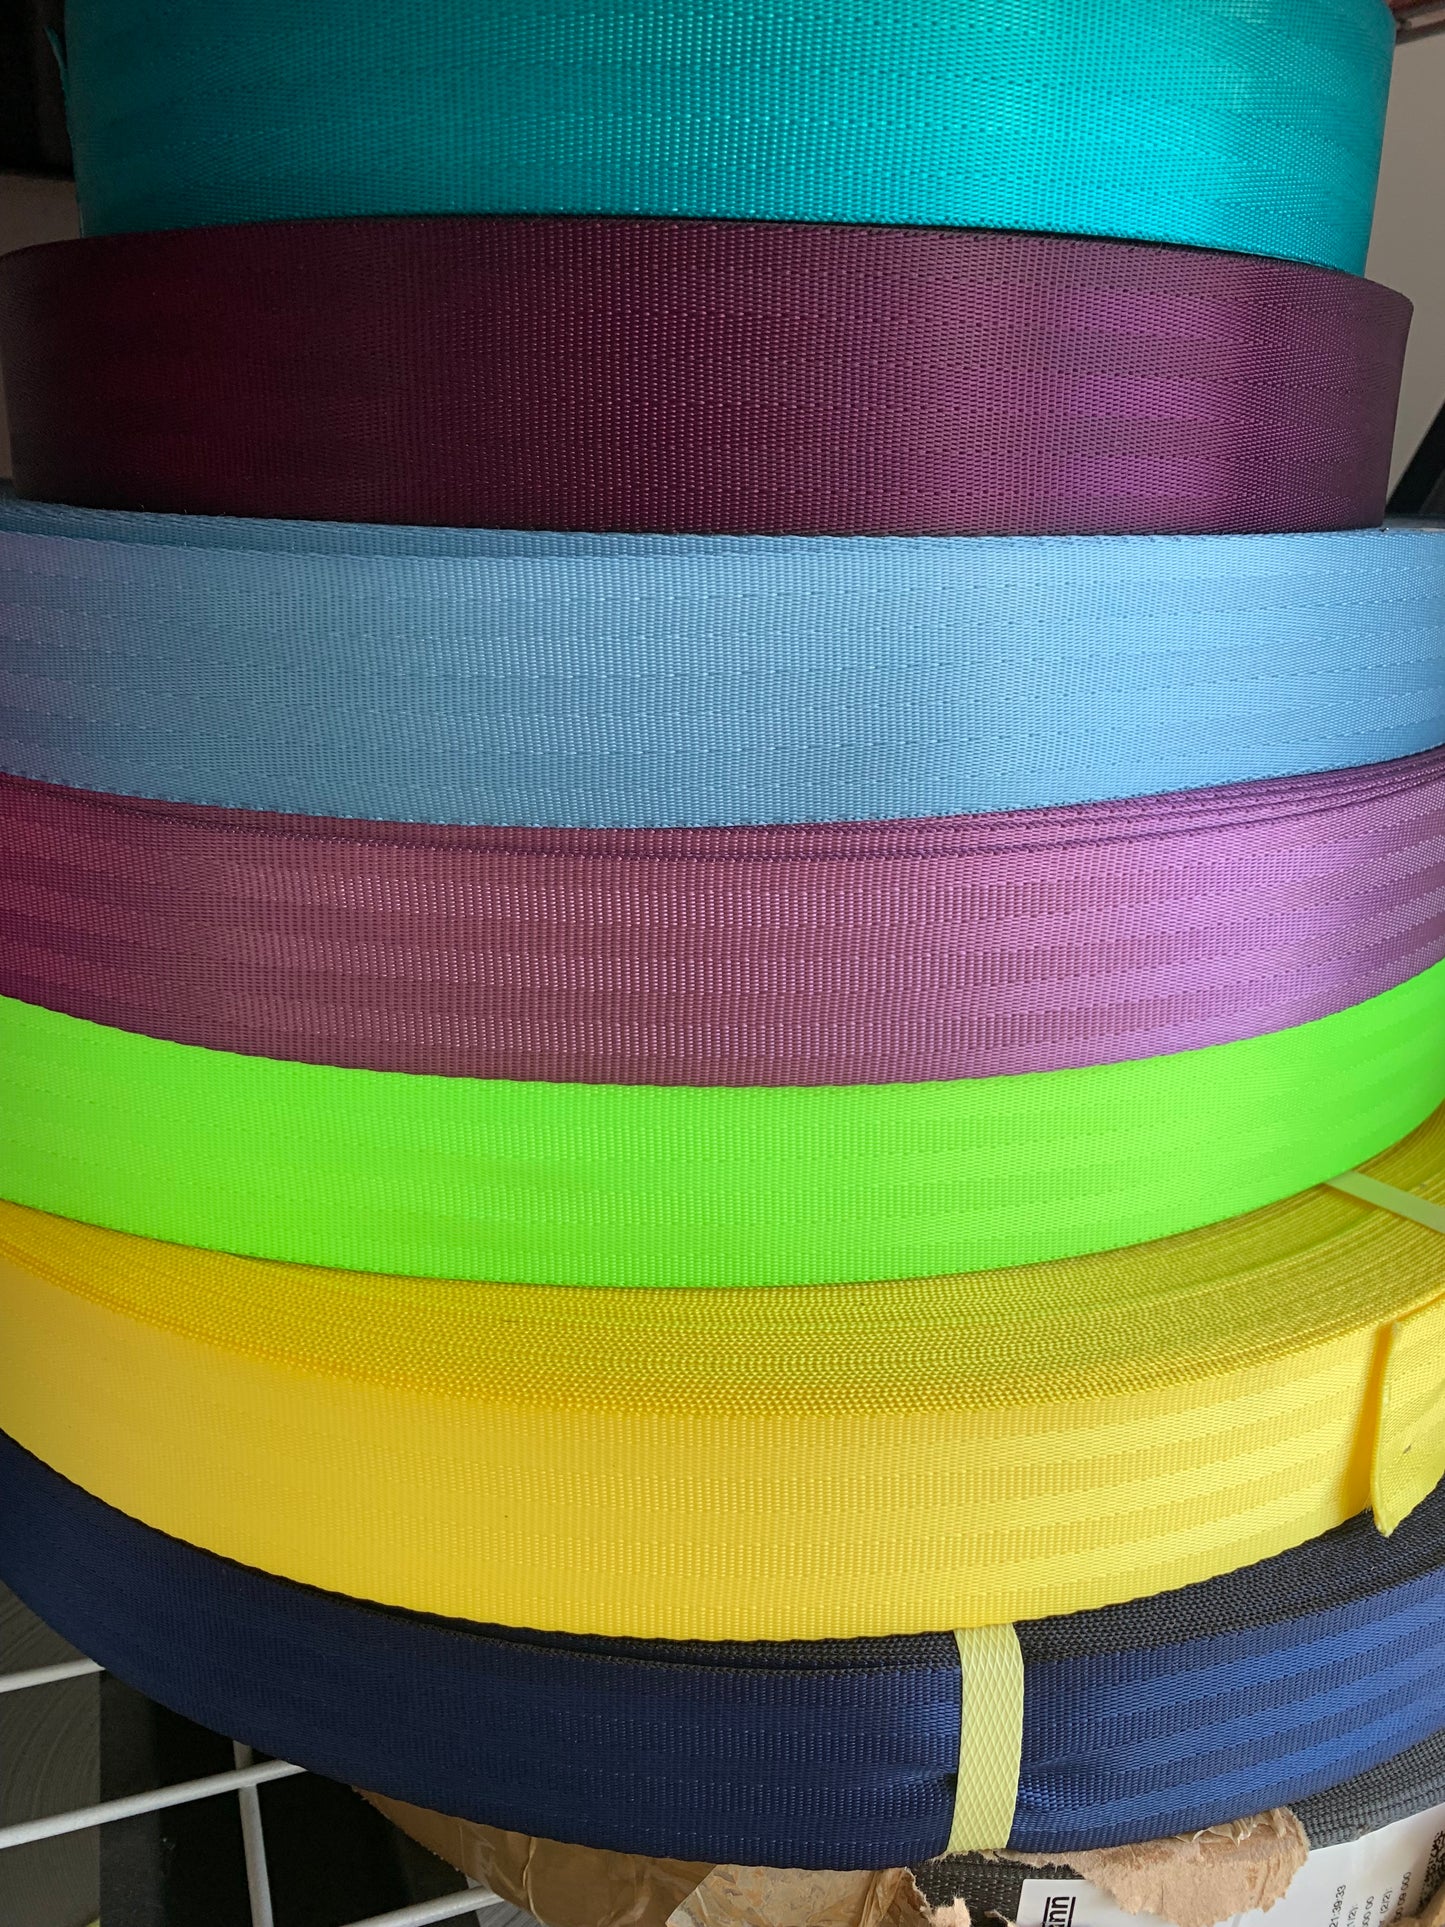 SEAT BELT WEBBING, 5, 10 or 20 yards in various colors, seatbelt strapping, diy craft projects, purse handbags